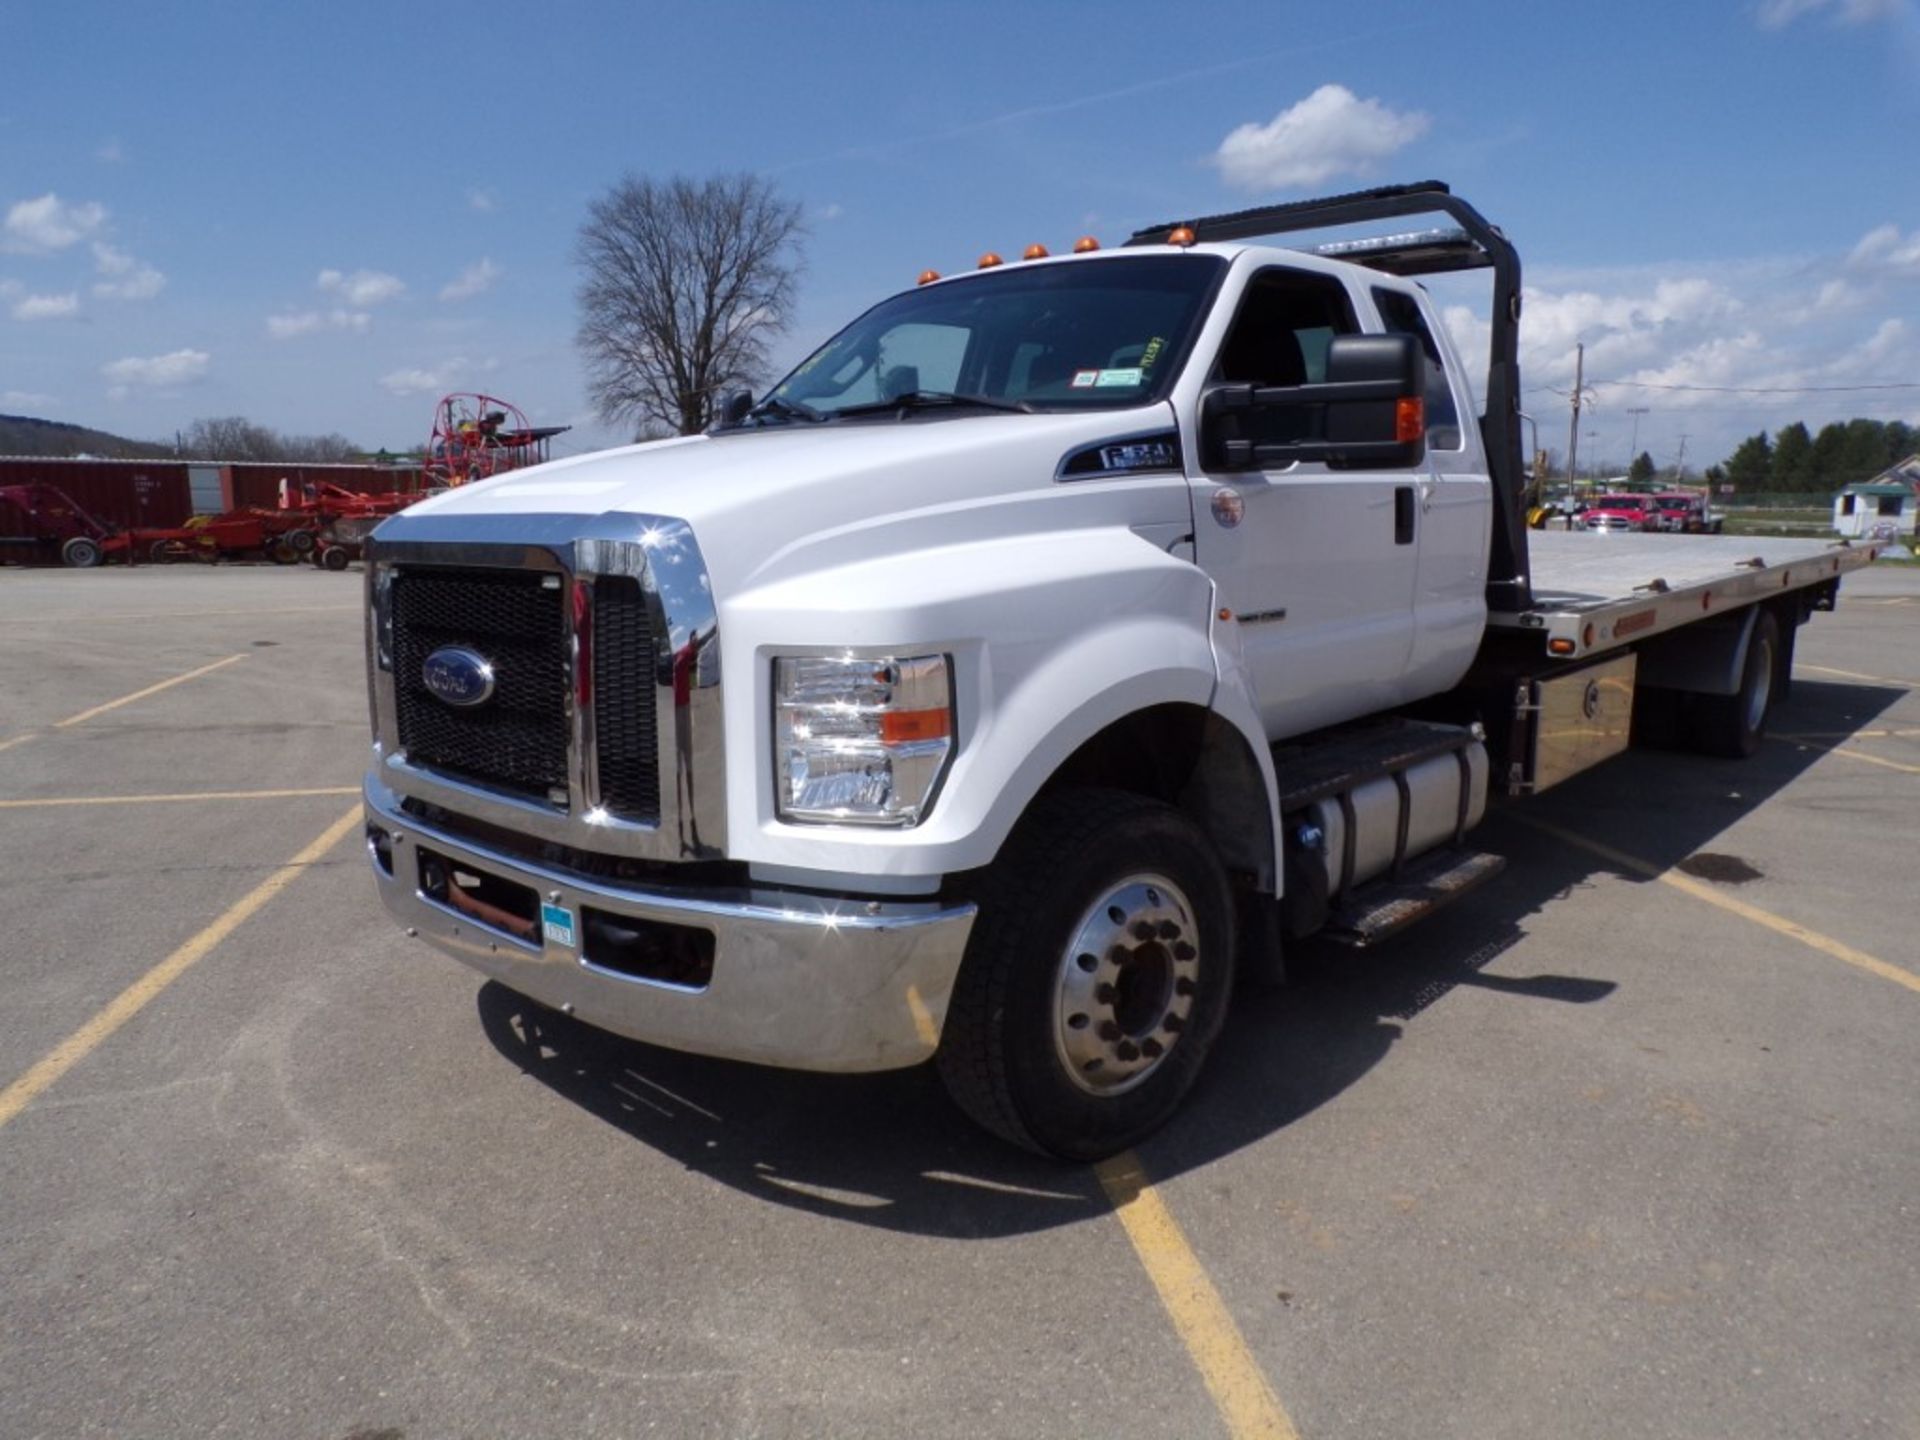 2018 Ford F650 Ext. Cab, Rollback Truck, 6.7 Dsl. Engine, Auto Trans, Air Brakes, 25,900 GVWR, - Image 4 of 13